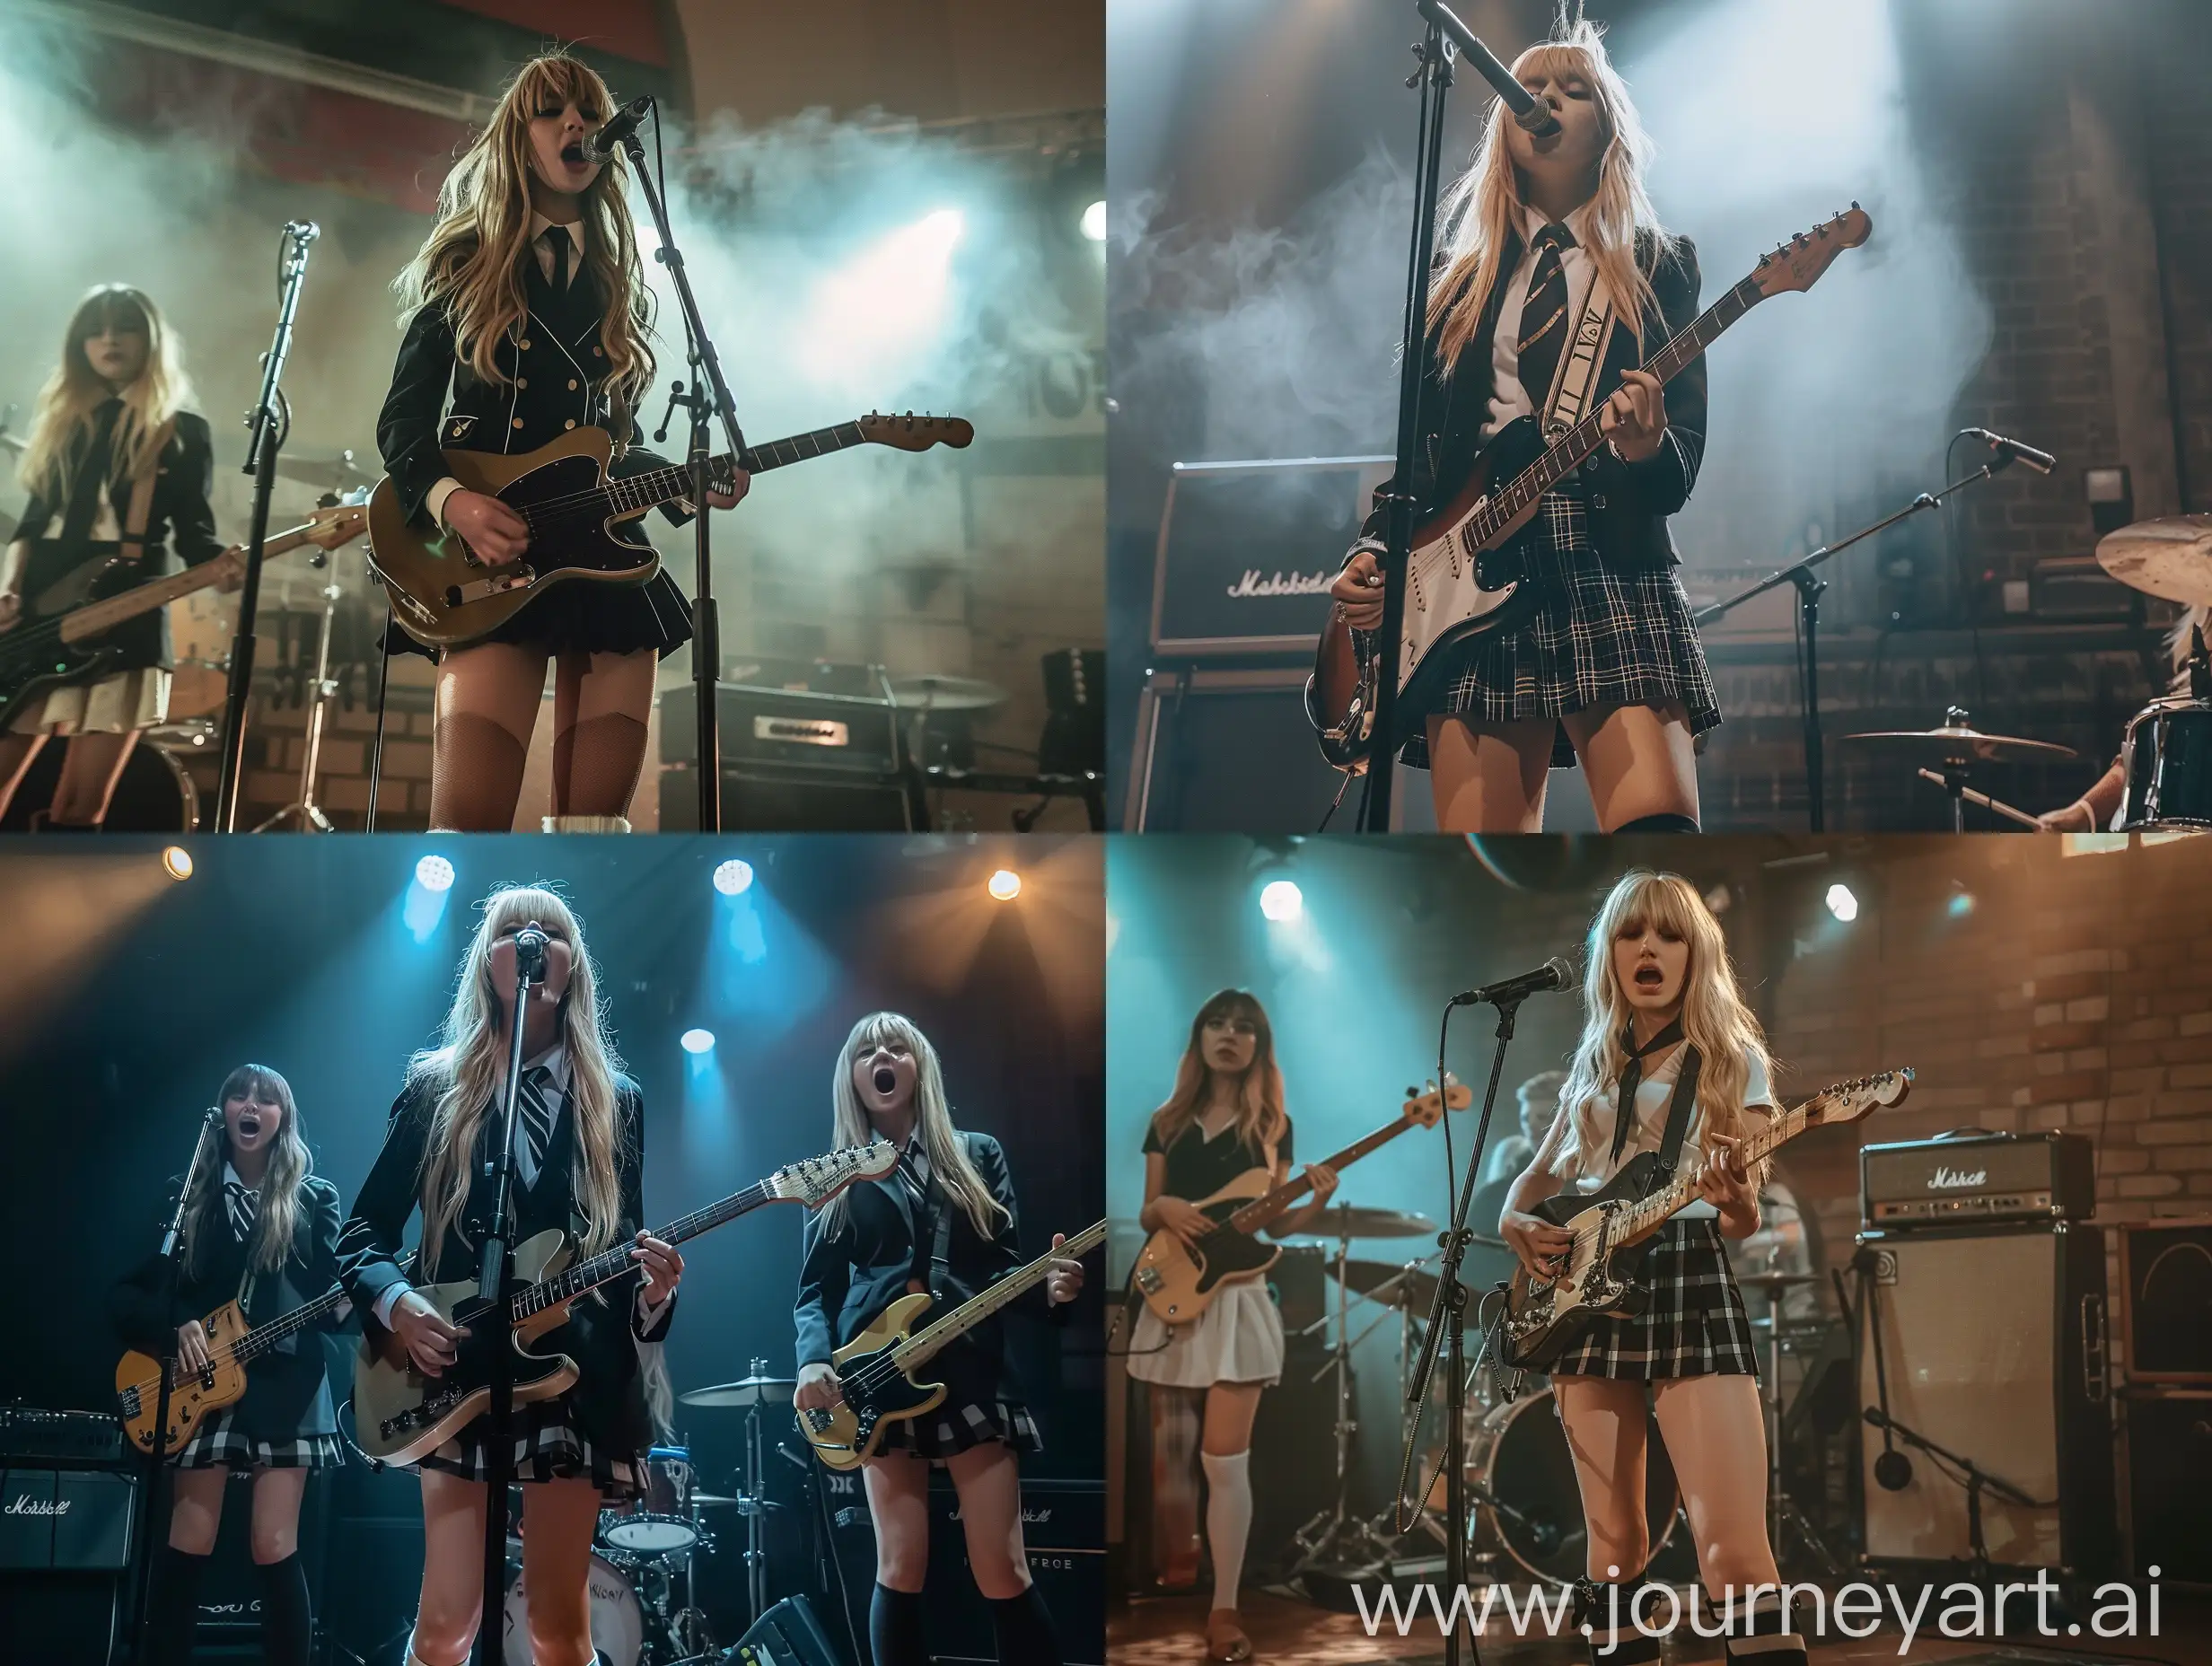 a band girls, long blond hair ,bangs, fringed hair, 22 years old, guitars, singing on stage, down view, singing with a band, influencer, beauty ,, black rbd school uniform, makeup,,  , socks and boots, no effect,  no filters , iphone photo natural